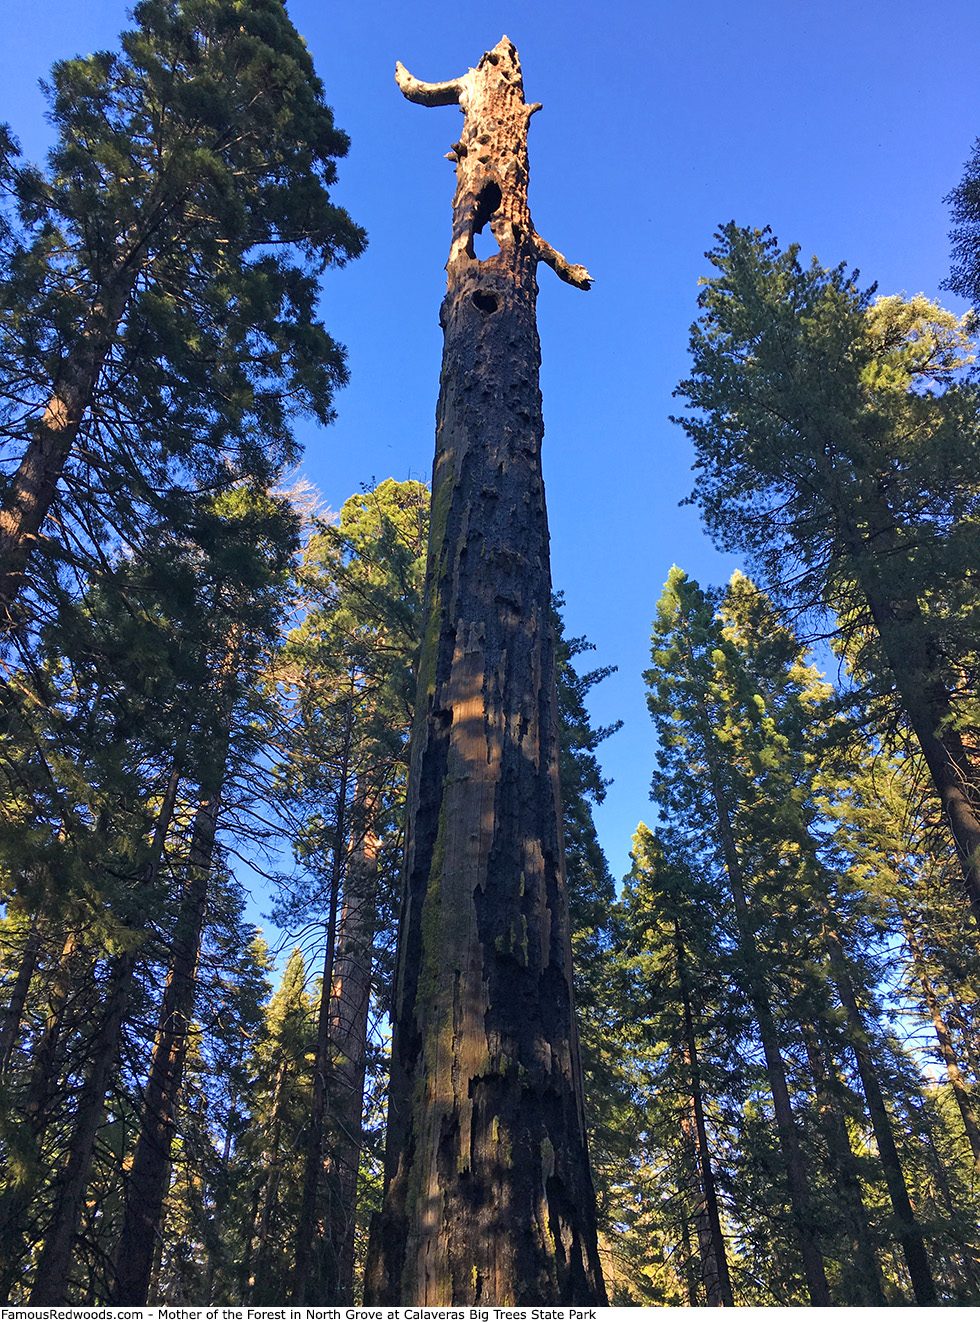 Calaveras Big Trees State Park - Mother of the Forest Tree